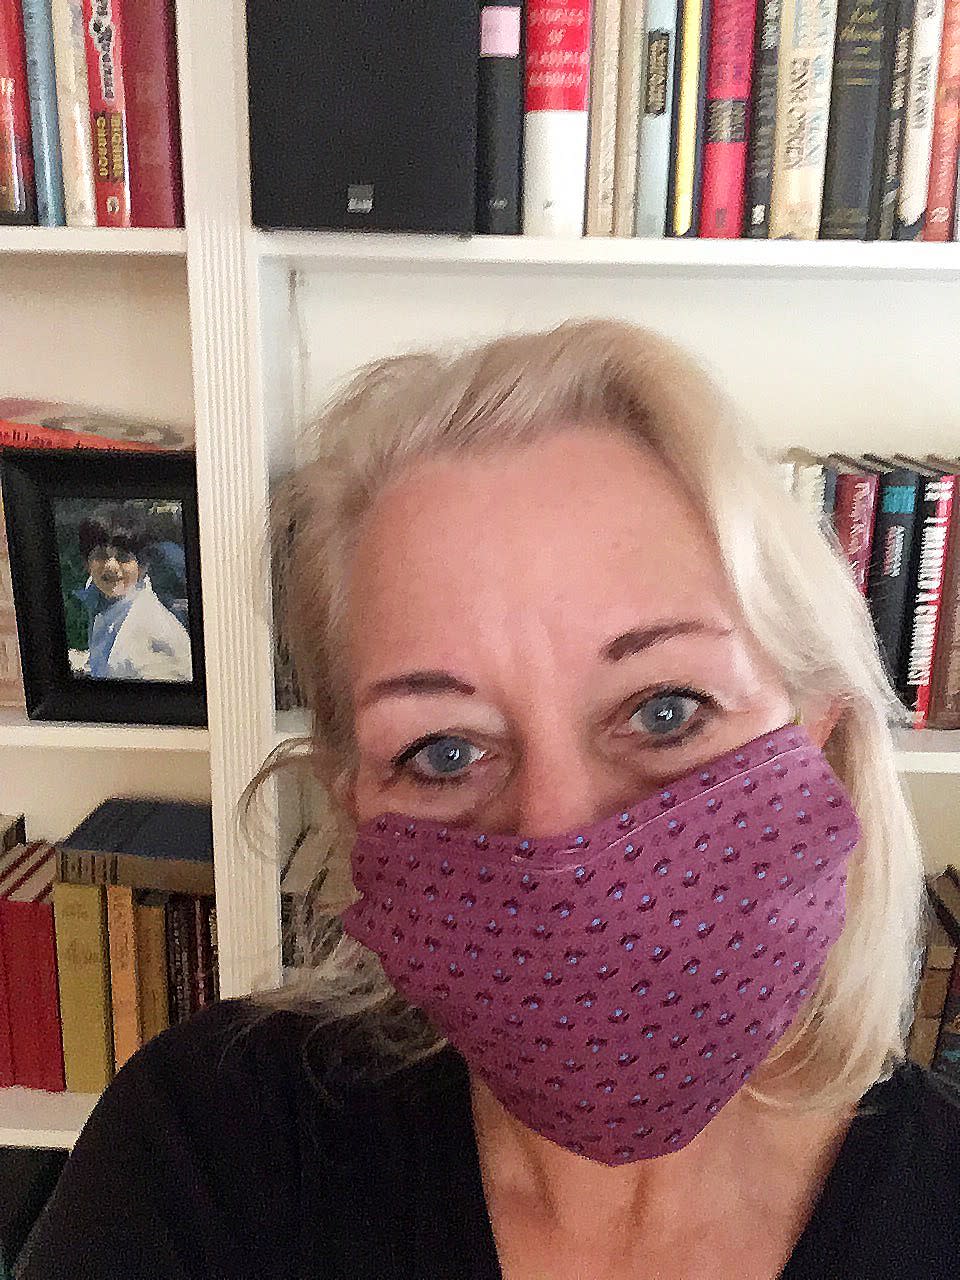 Laura Lippman with a homemade mask.